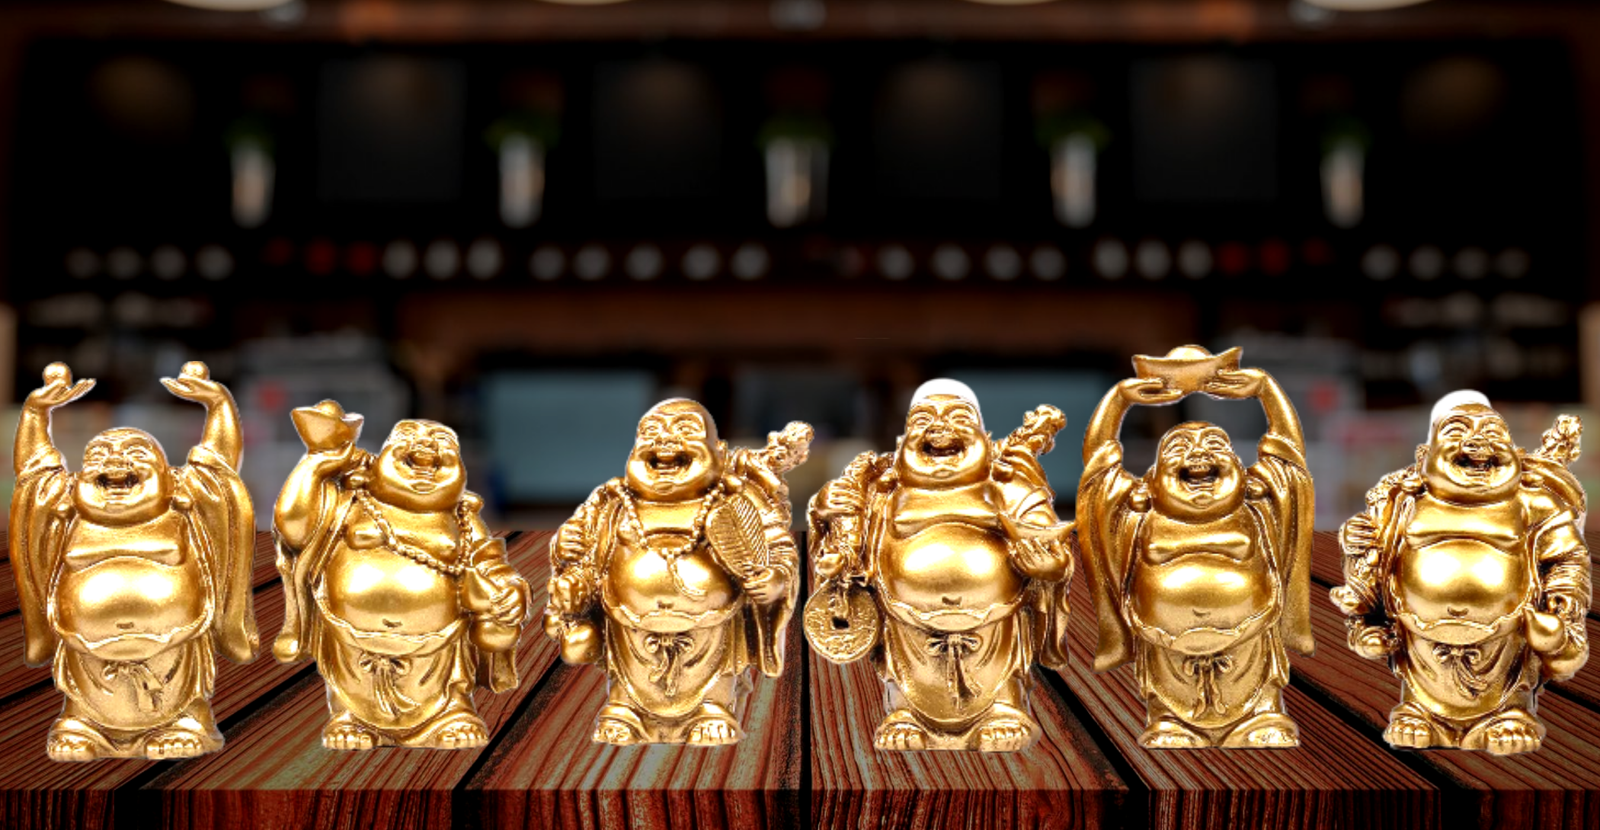 Types Of Laughing Buddha- Their Importance In Life